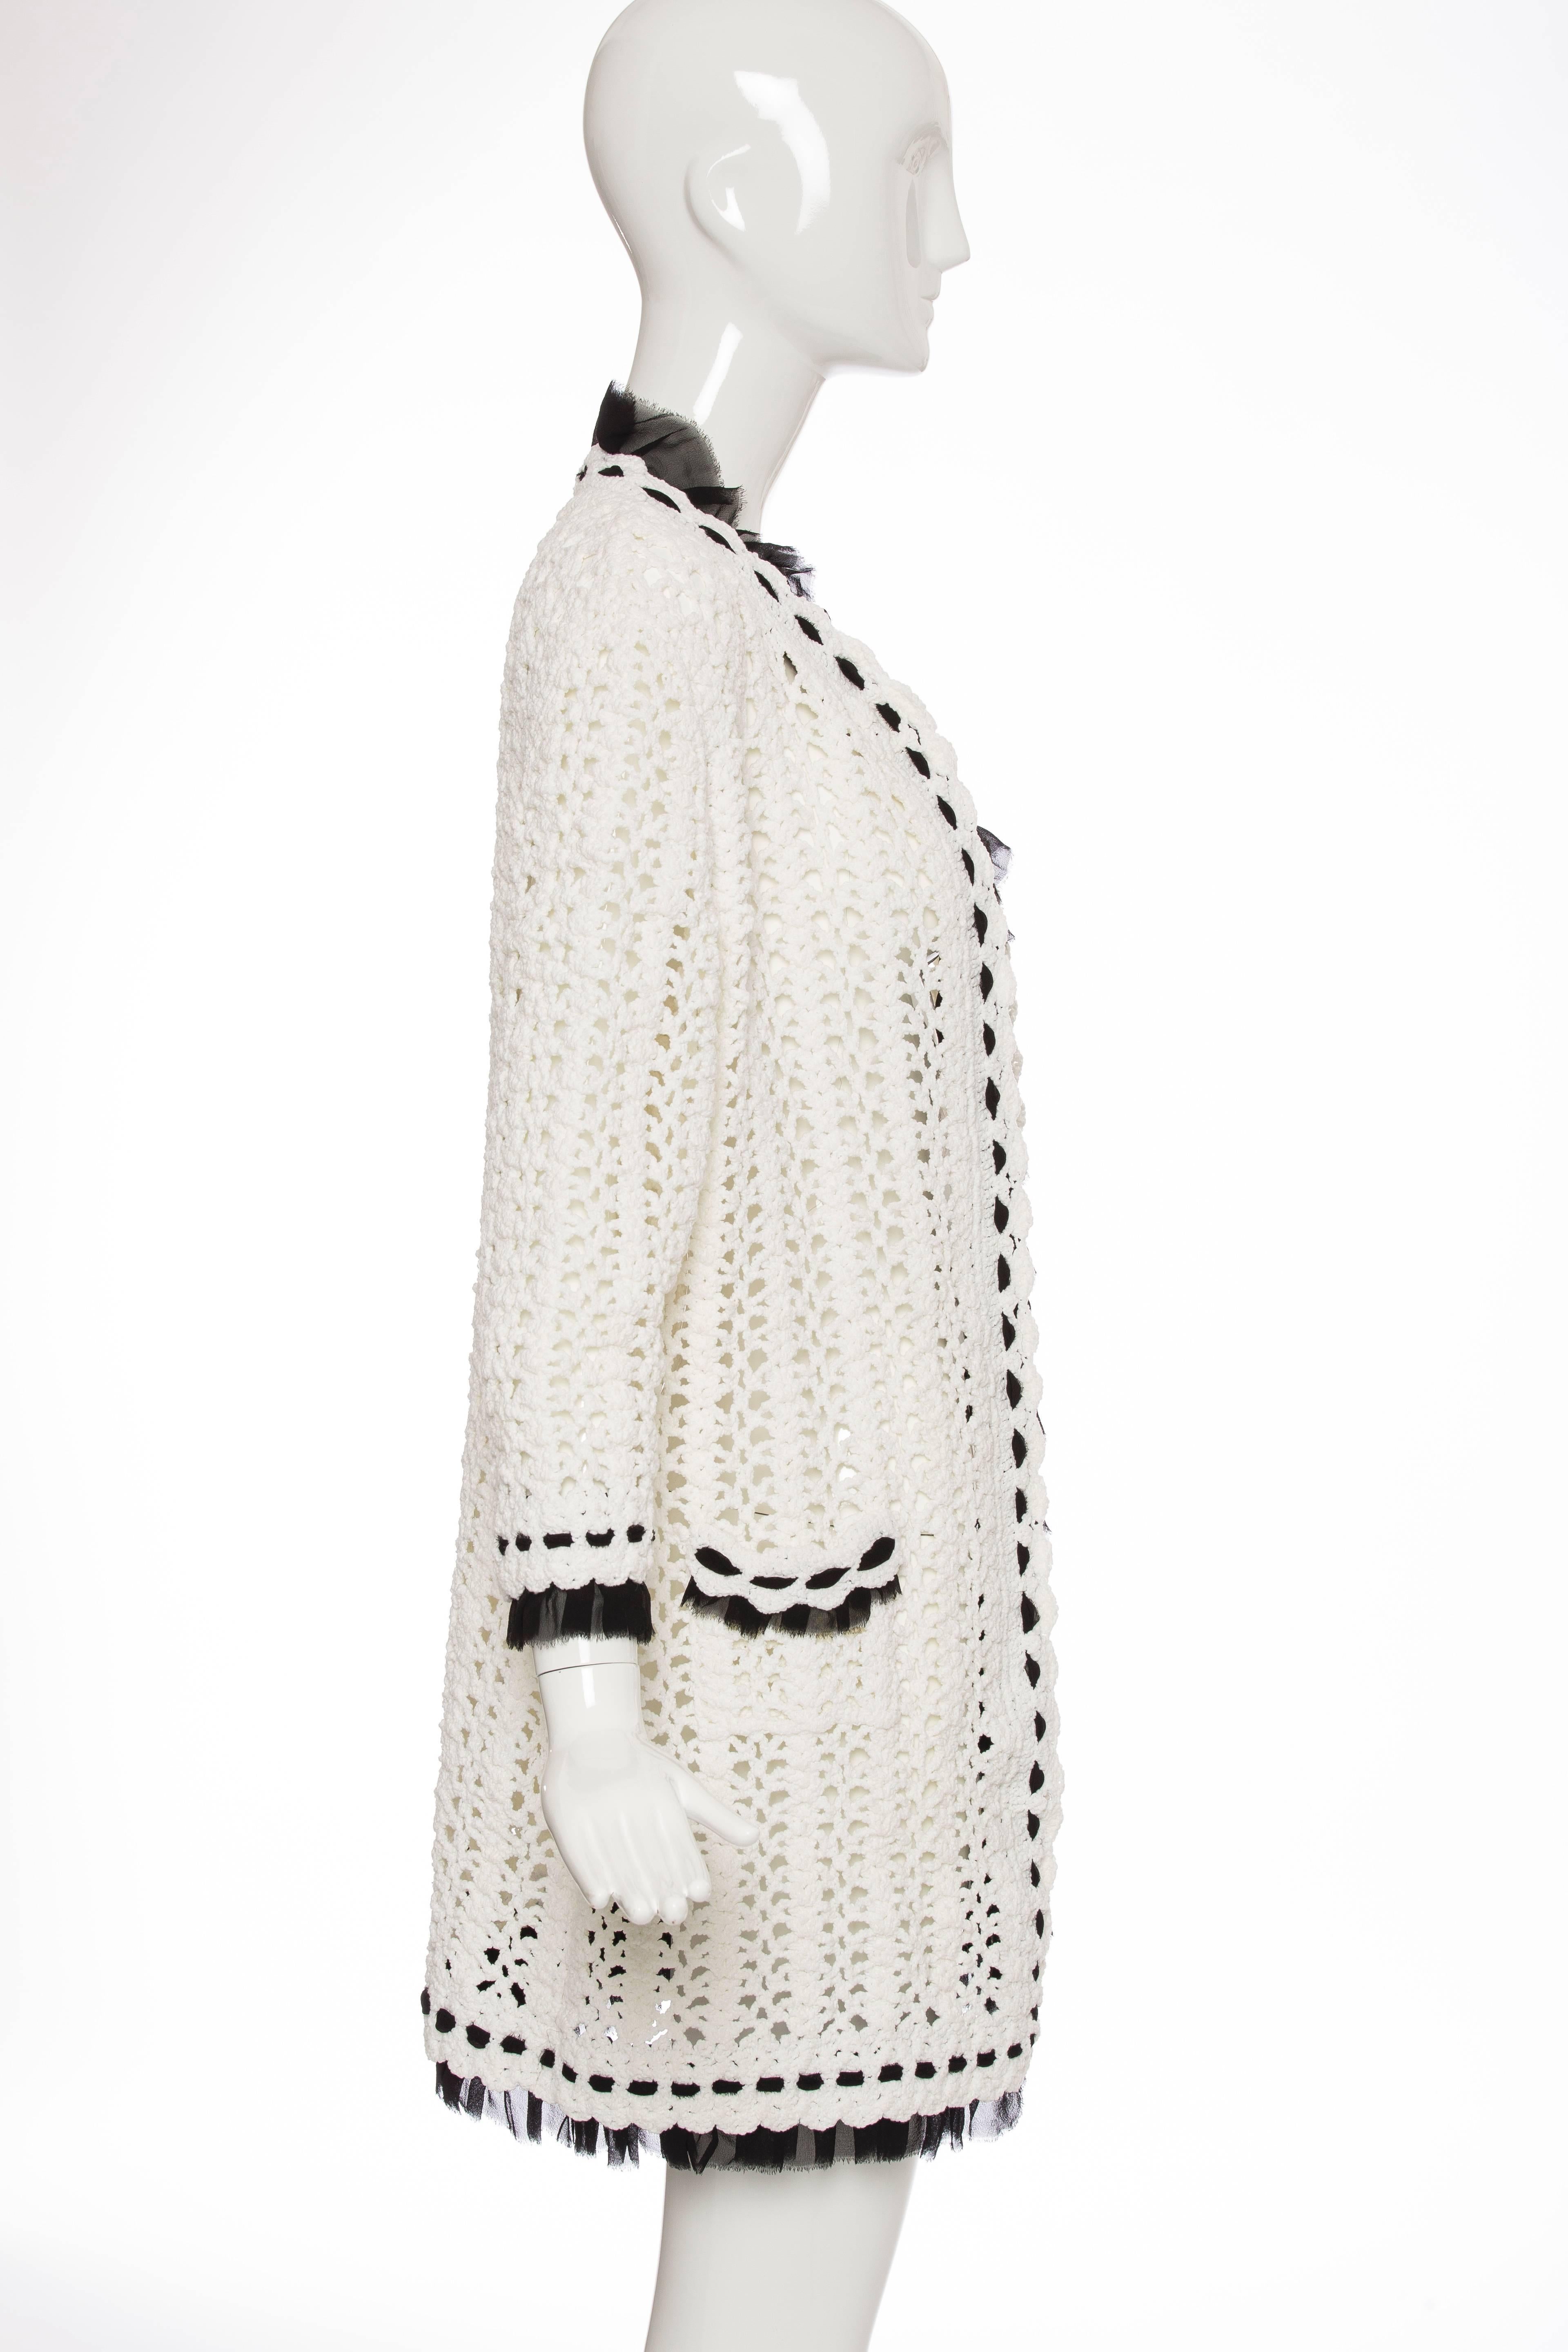 Chanel, Spring 2005, ivory long sleeve crochet knit cardigan with black silk chiffon trim throughout and dual patch pockets at front.

FR. 42
US. 10

 Bust 39”, Waist 38”, Length 31”
Fabric Content: 81% Nylon, 18% Cotton, 1% Elastane; Combo